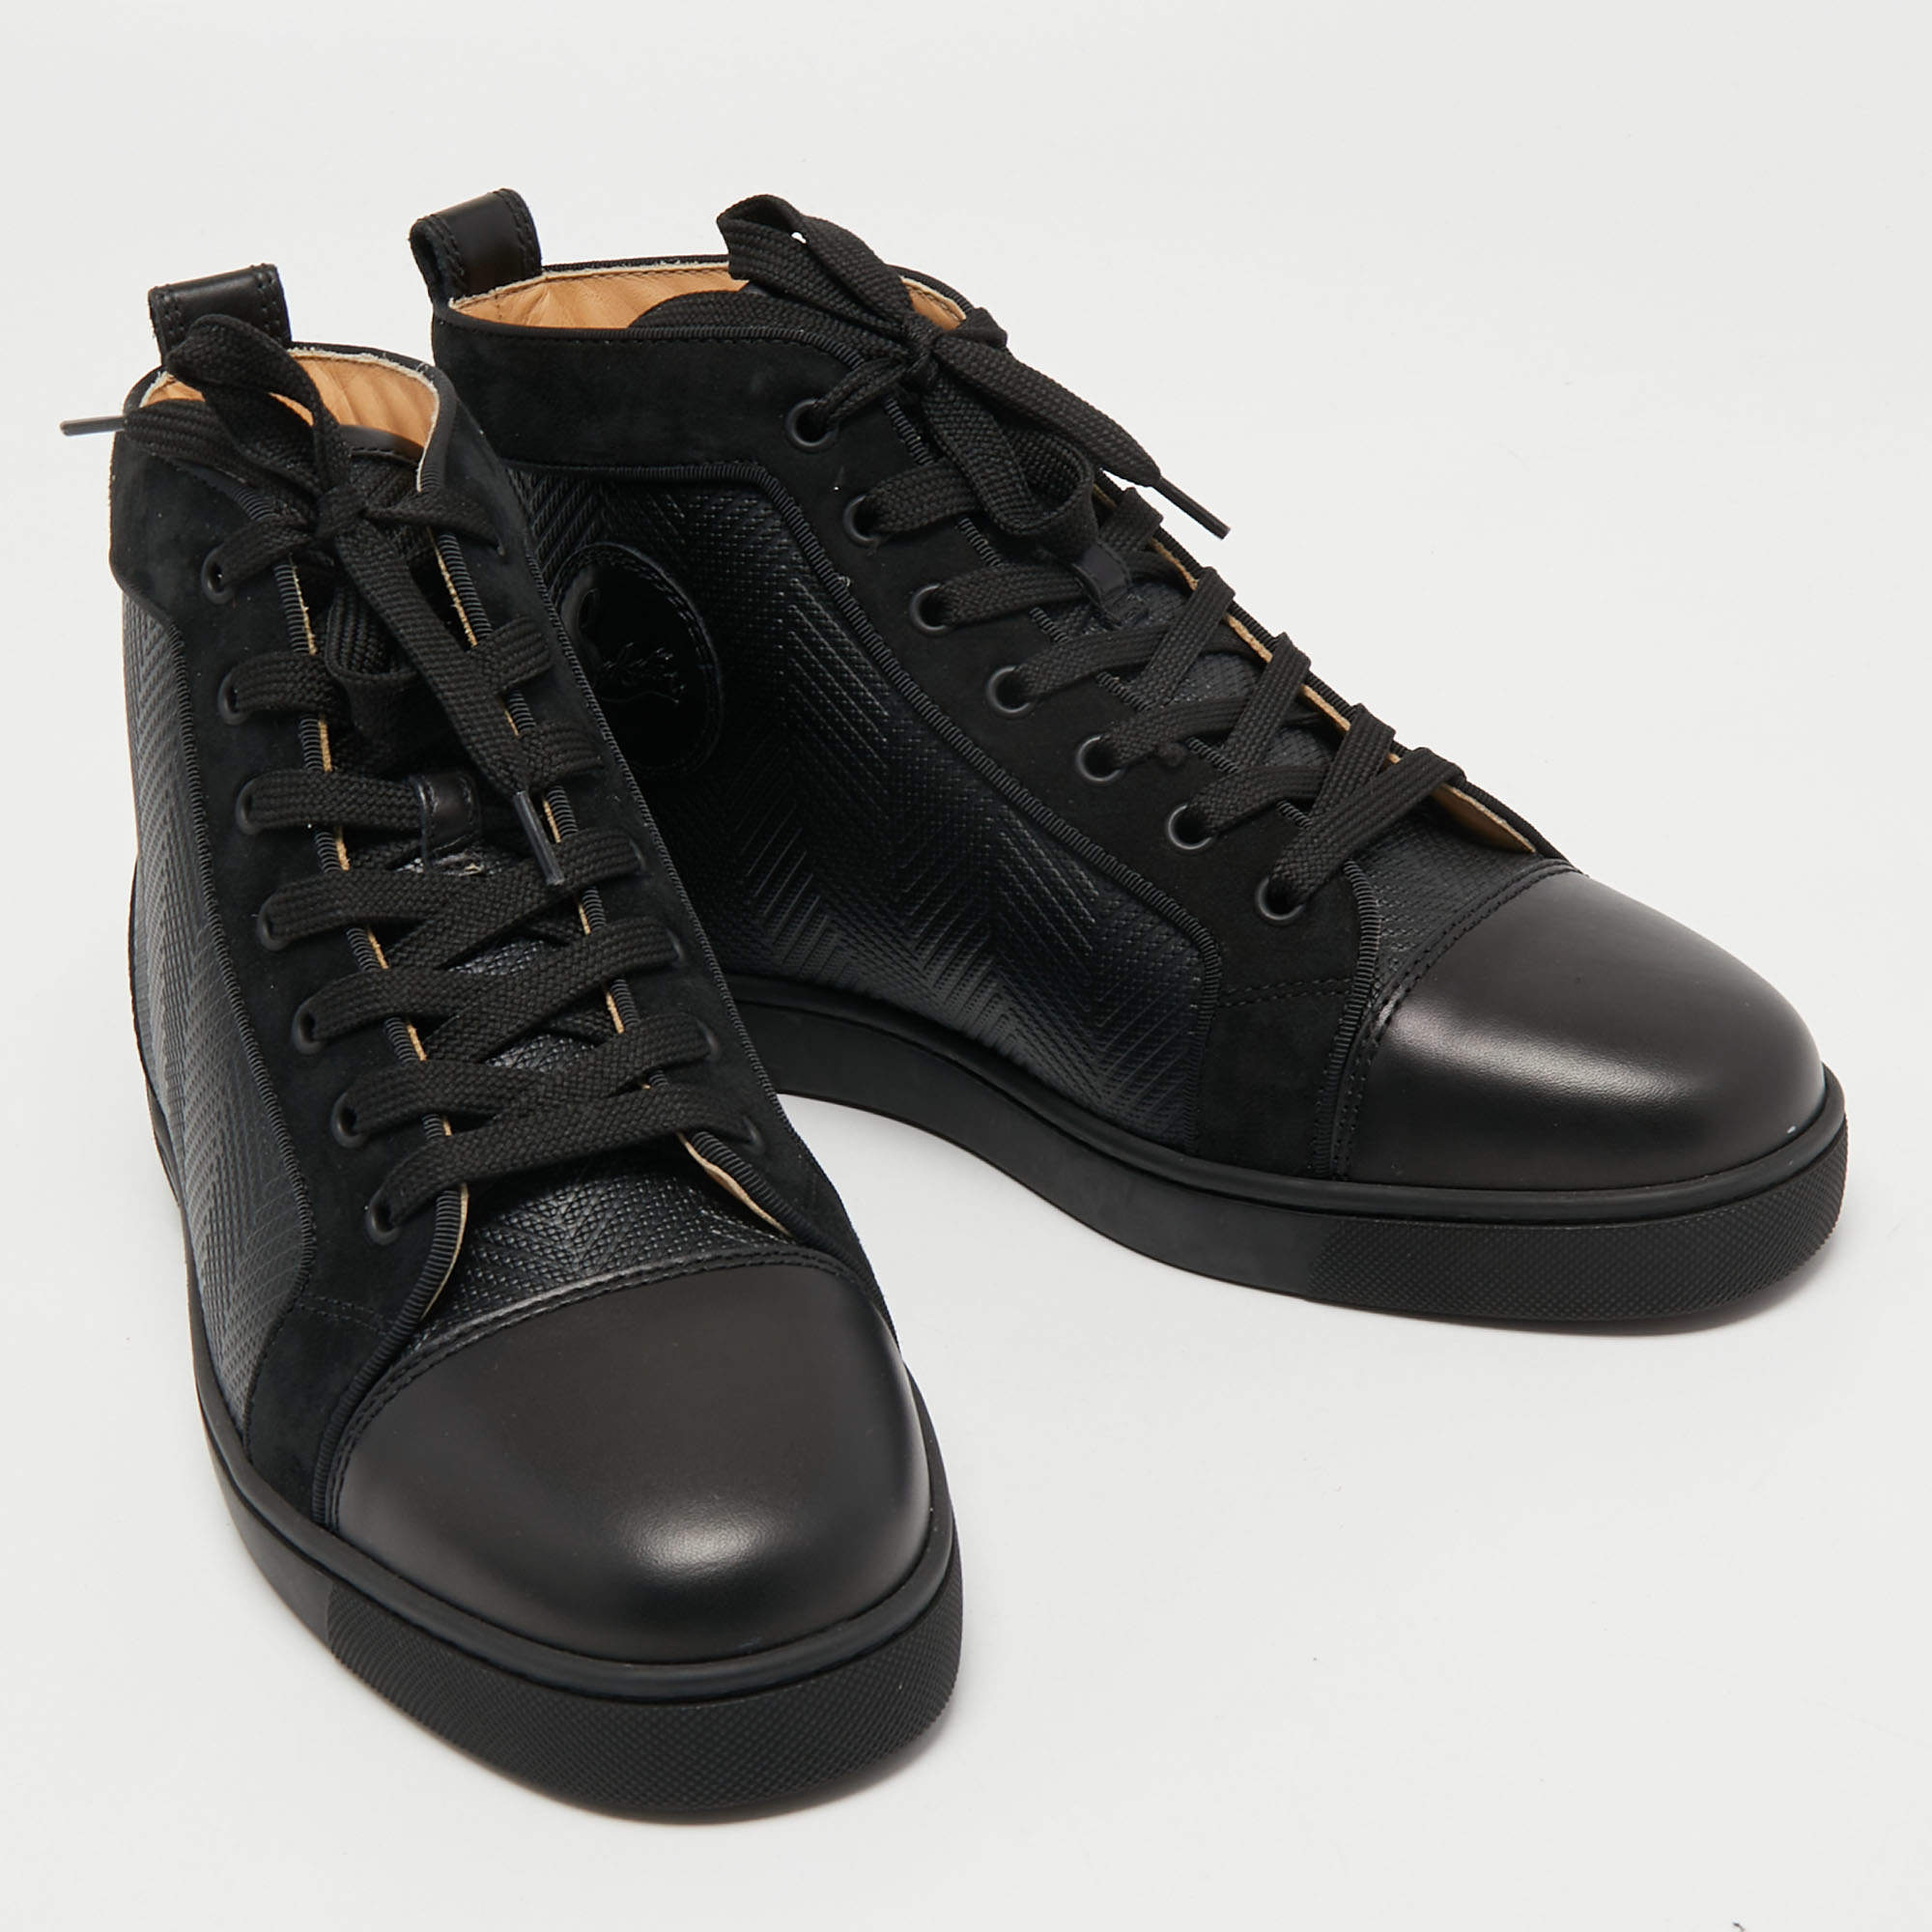 Louis leather high trainers Christian Louboutin Black size 41 EU in Leather  - 36026873